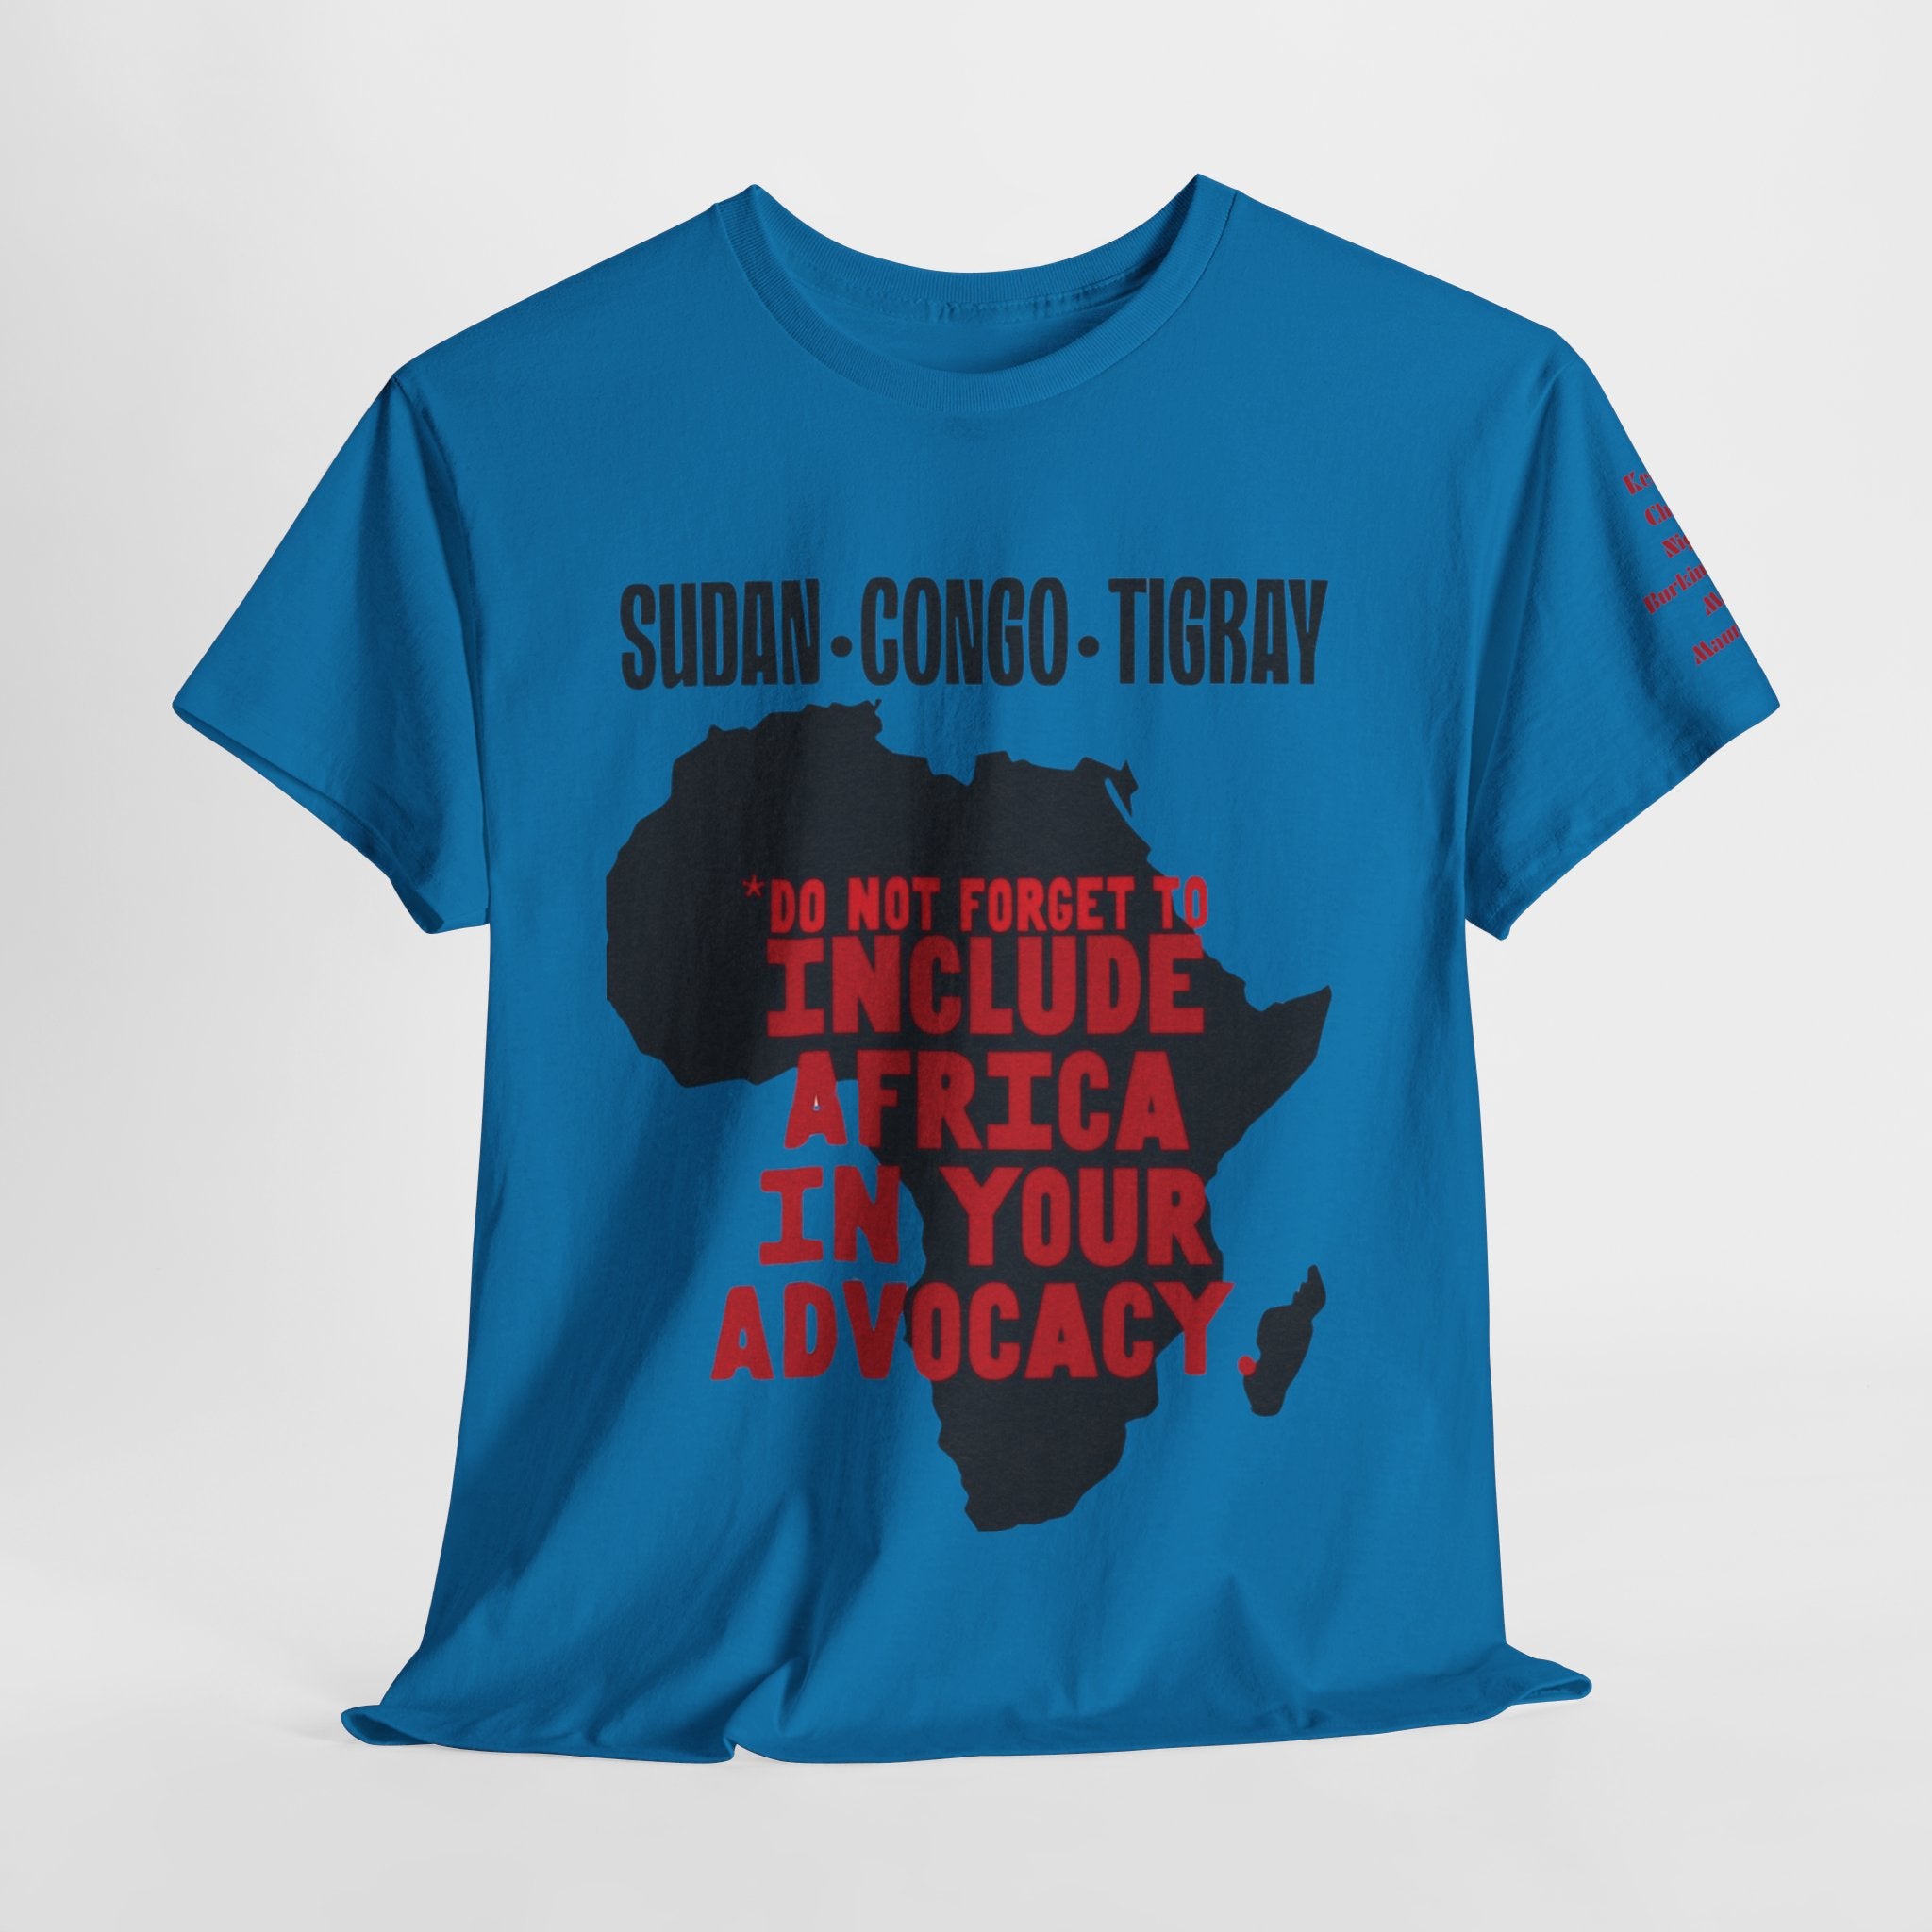 Africa Advocacy T-Shirt